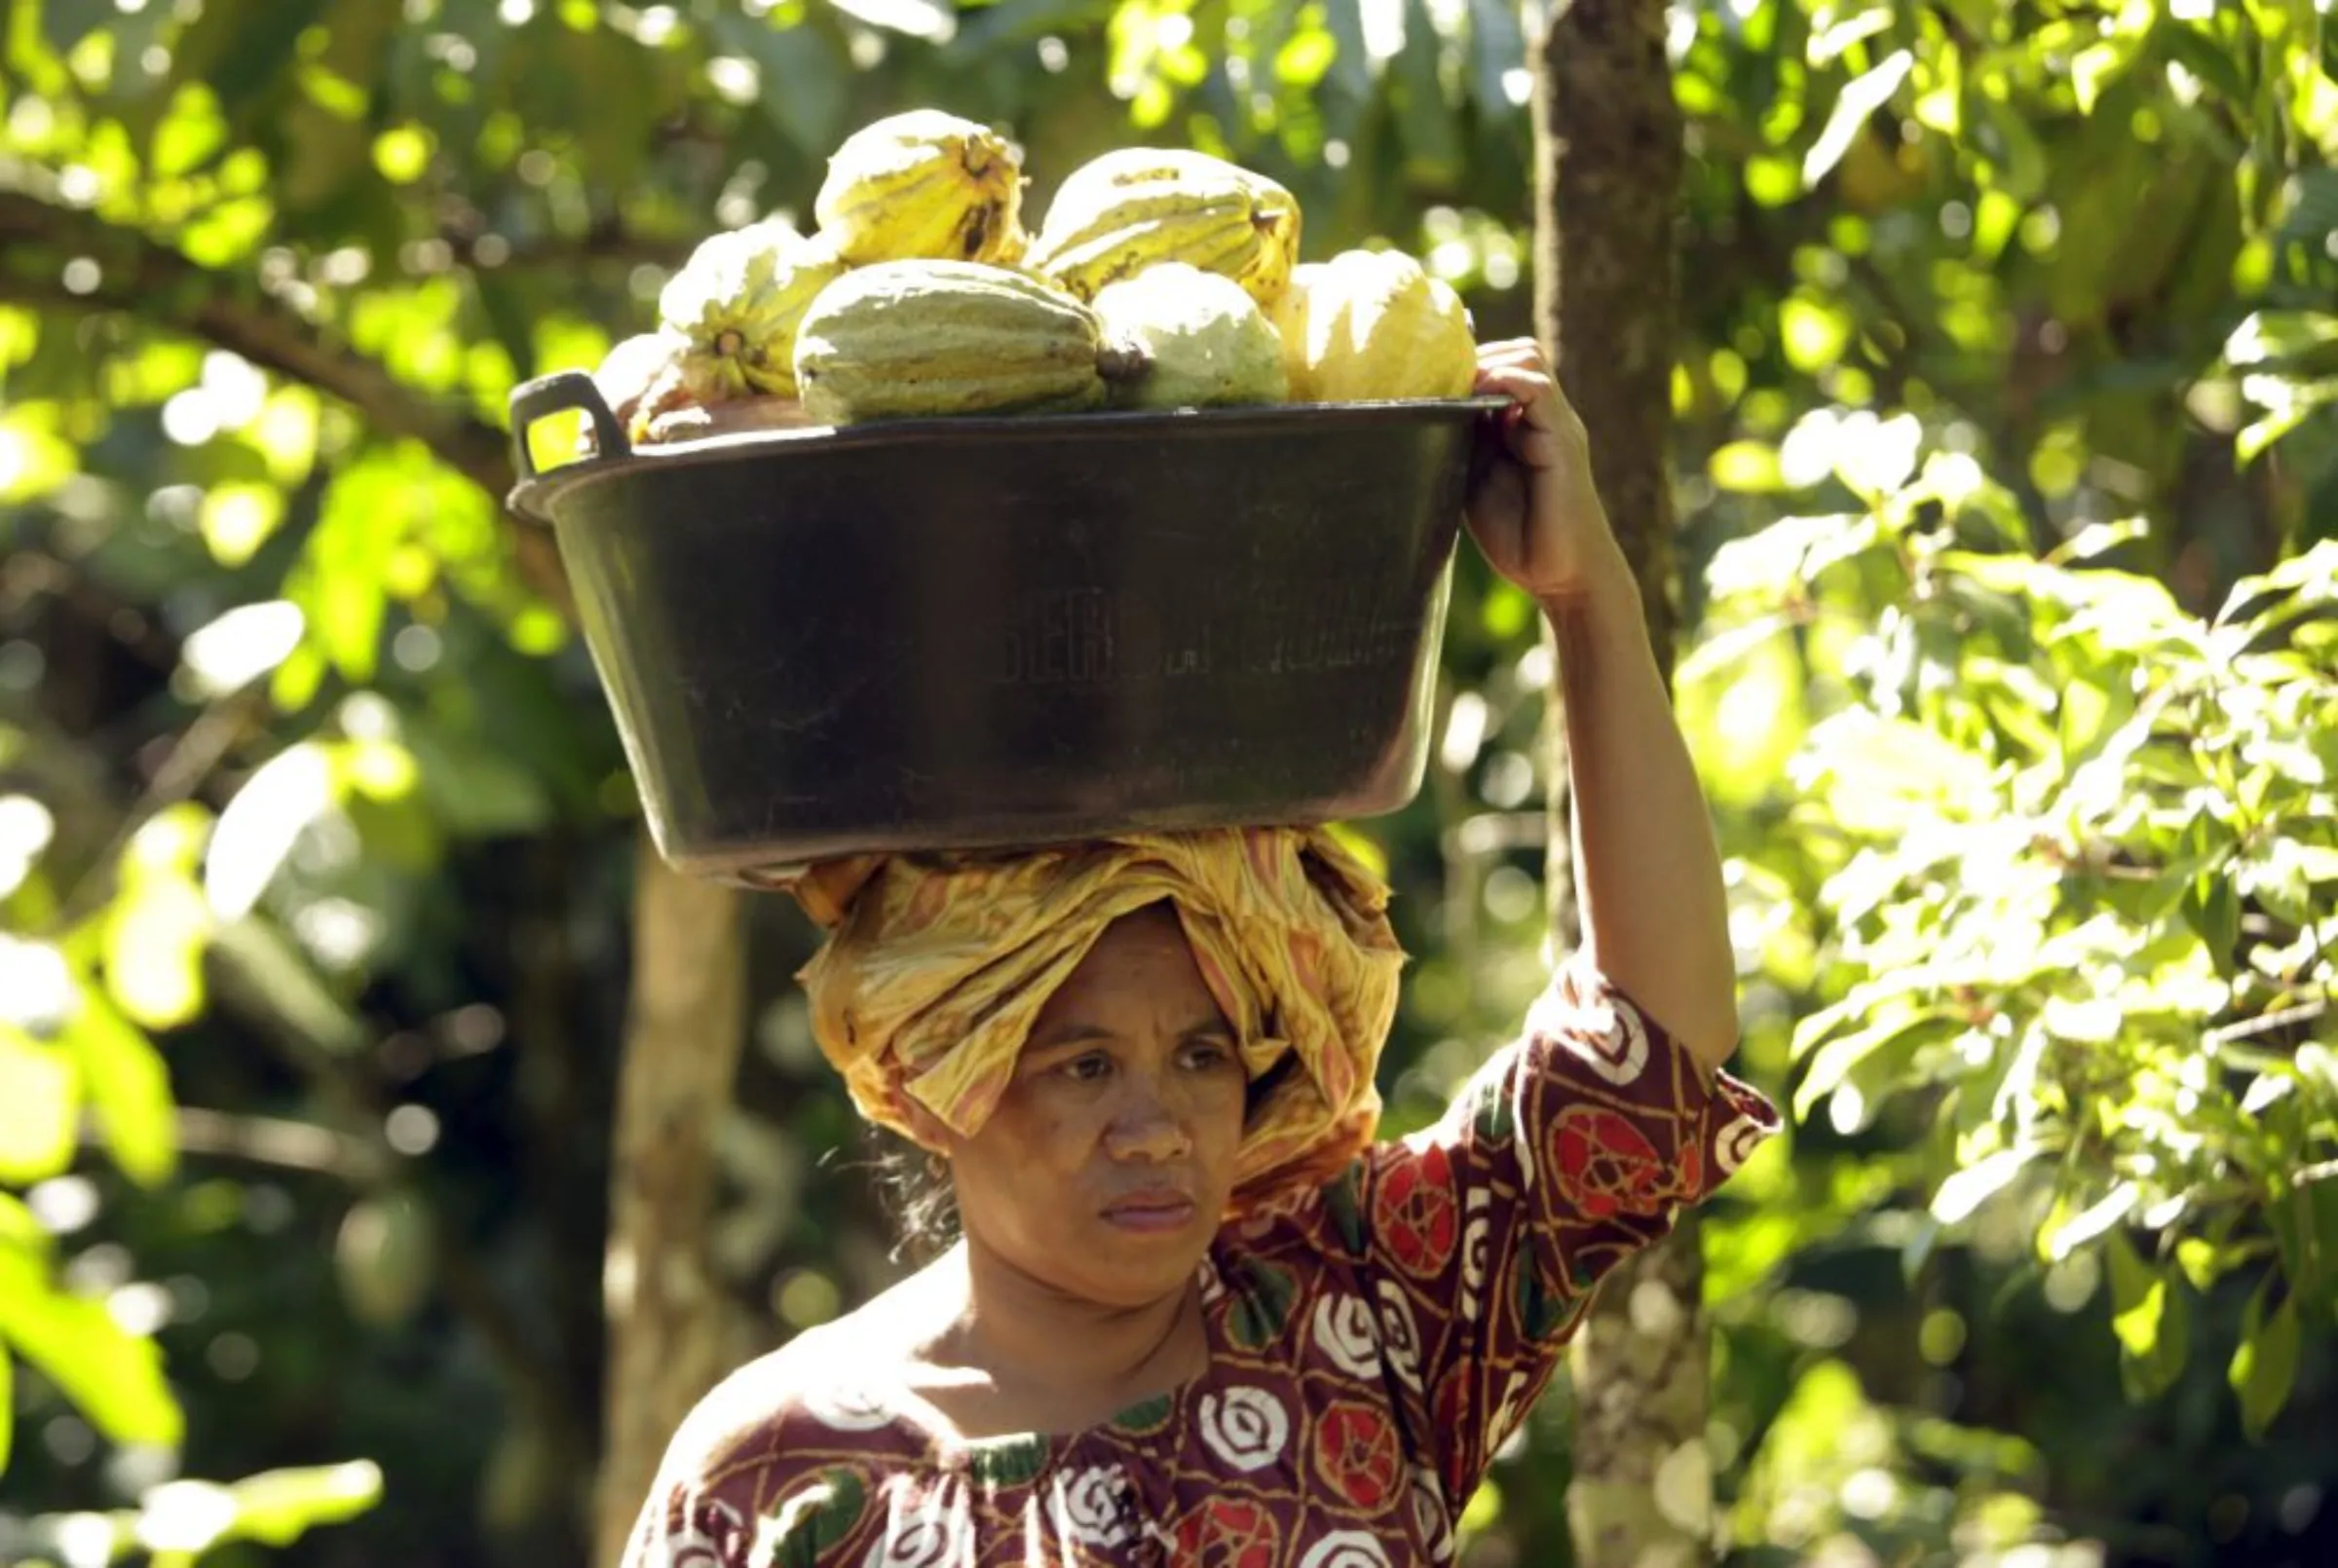 A farmer carries cocoa fruits at a plantation in Gantarang Keke Village, South Sulawesi, Indonesia May 8, 2015. Sulawesi is at the heart of Asia's largest cocoa producing region, and is where some international confectioners are looking to boost output to feed growing demand for chocolate in the region